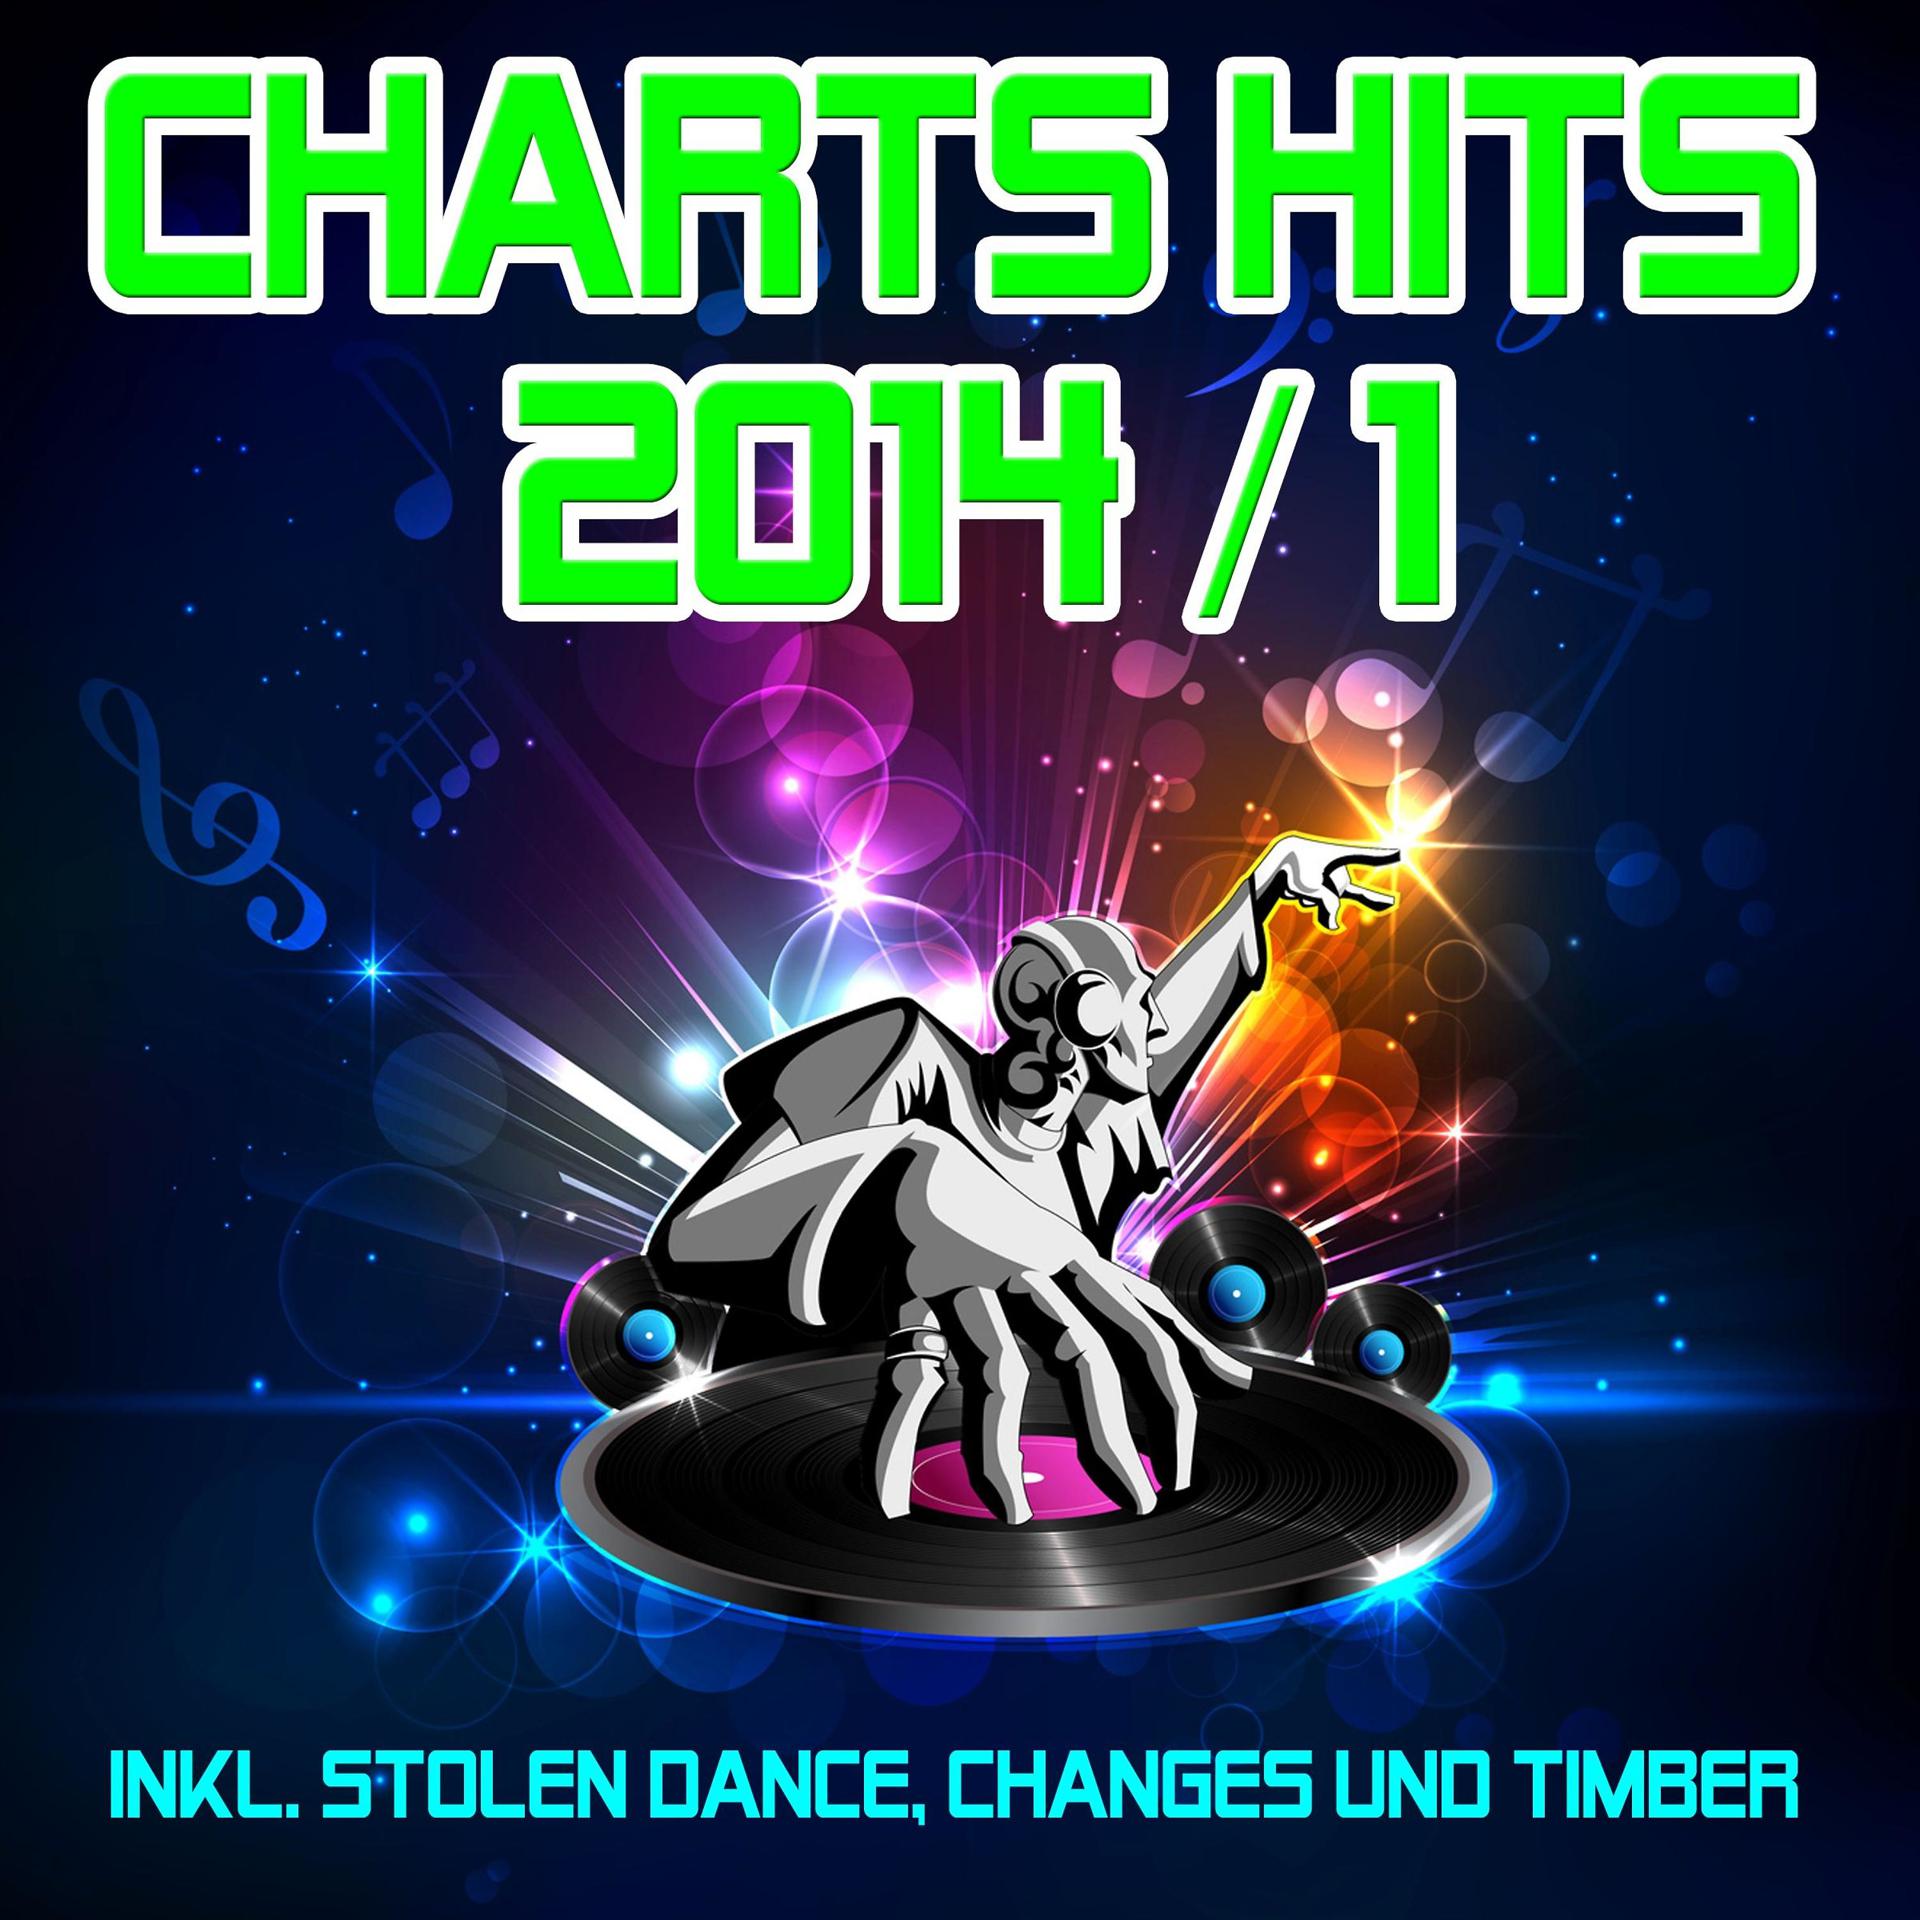 Постер альбома Charts Hits 2014 / 1 (Inkl. Stolen Dance, Changes Und Timber)